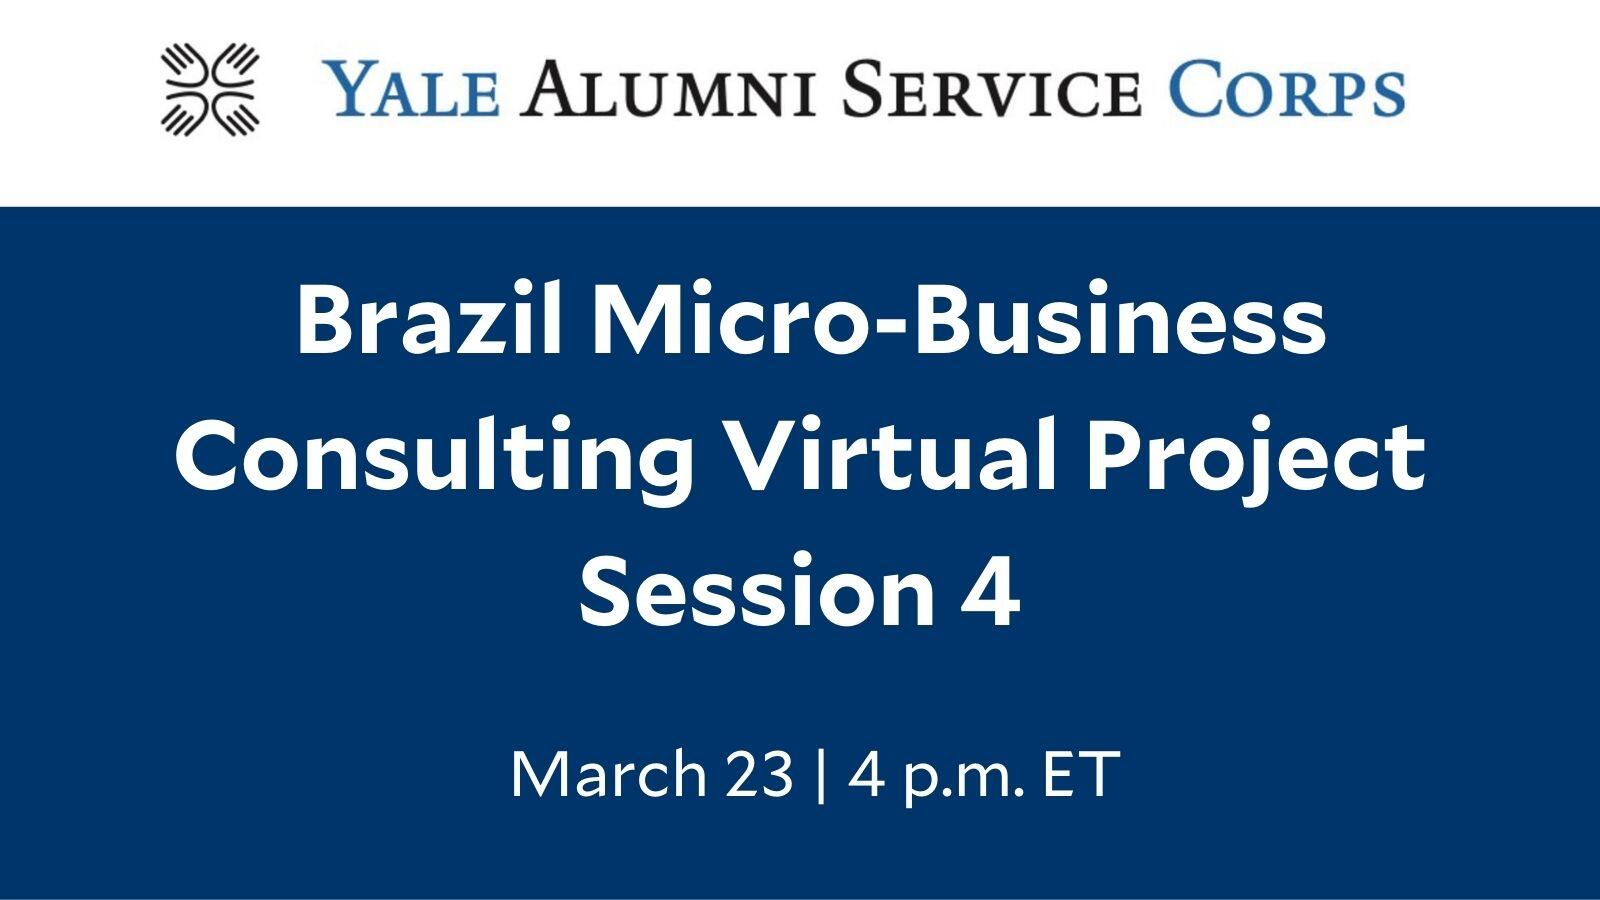 Brazil Micro-Business Consulting Virtual Project – Session 4